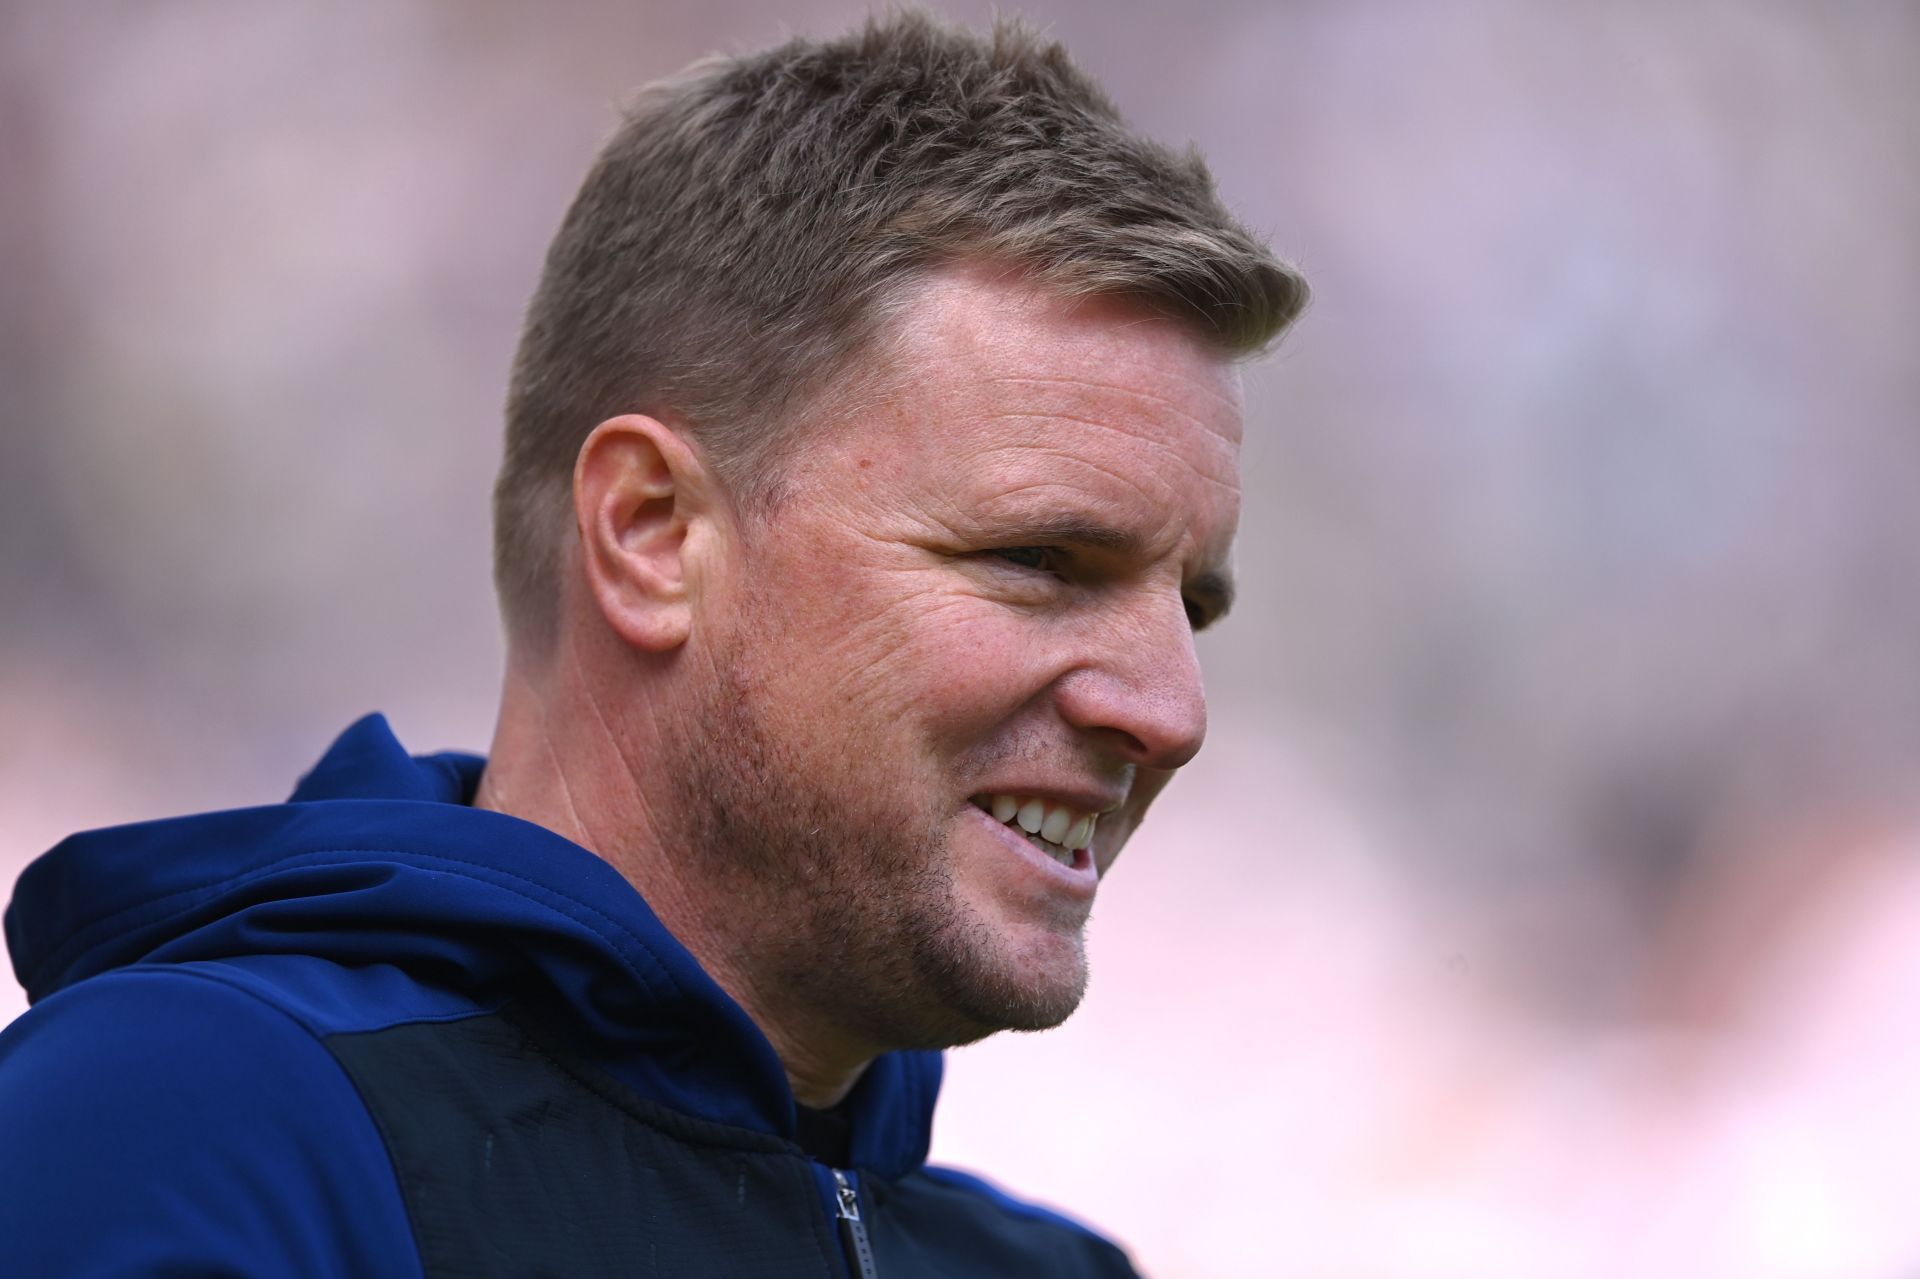 Newcastle United are set over a major overhaul under Eddie Howe this summer